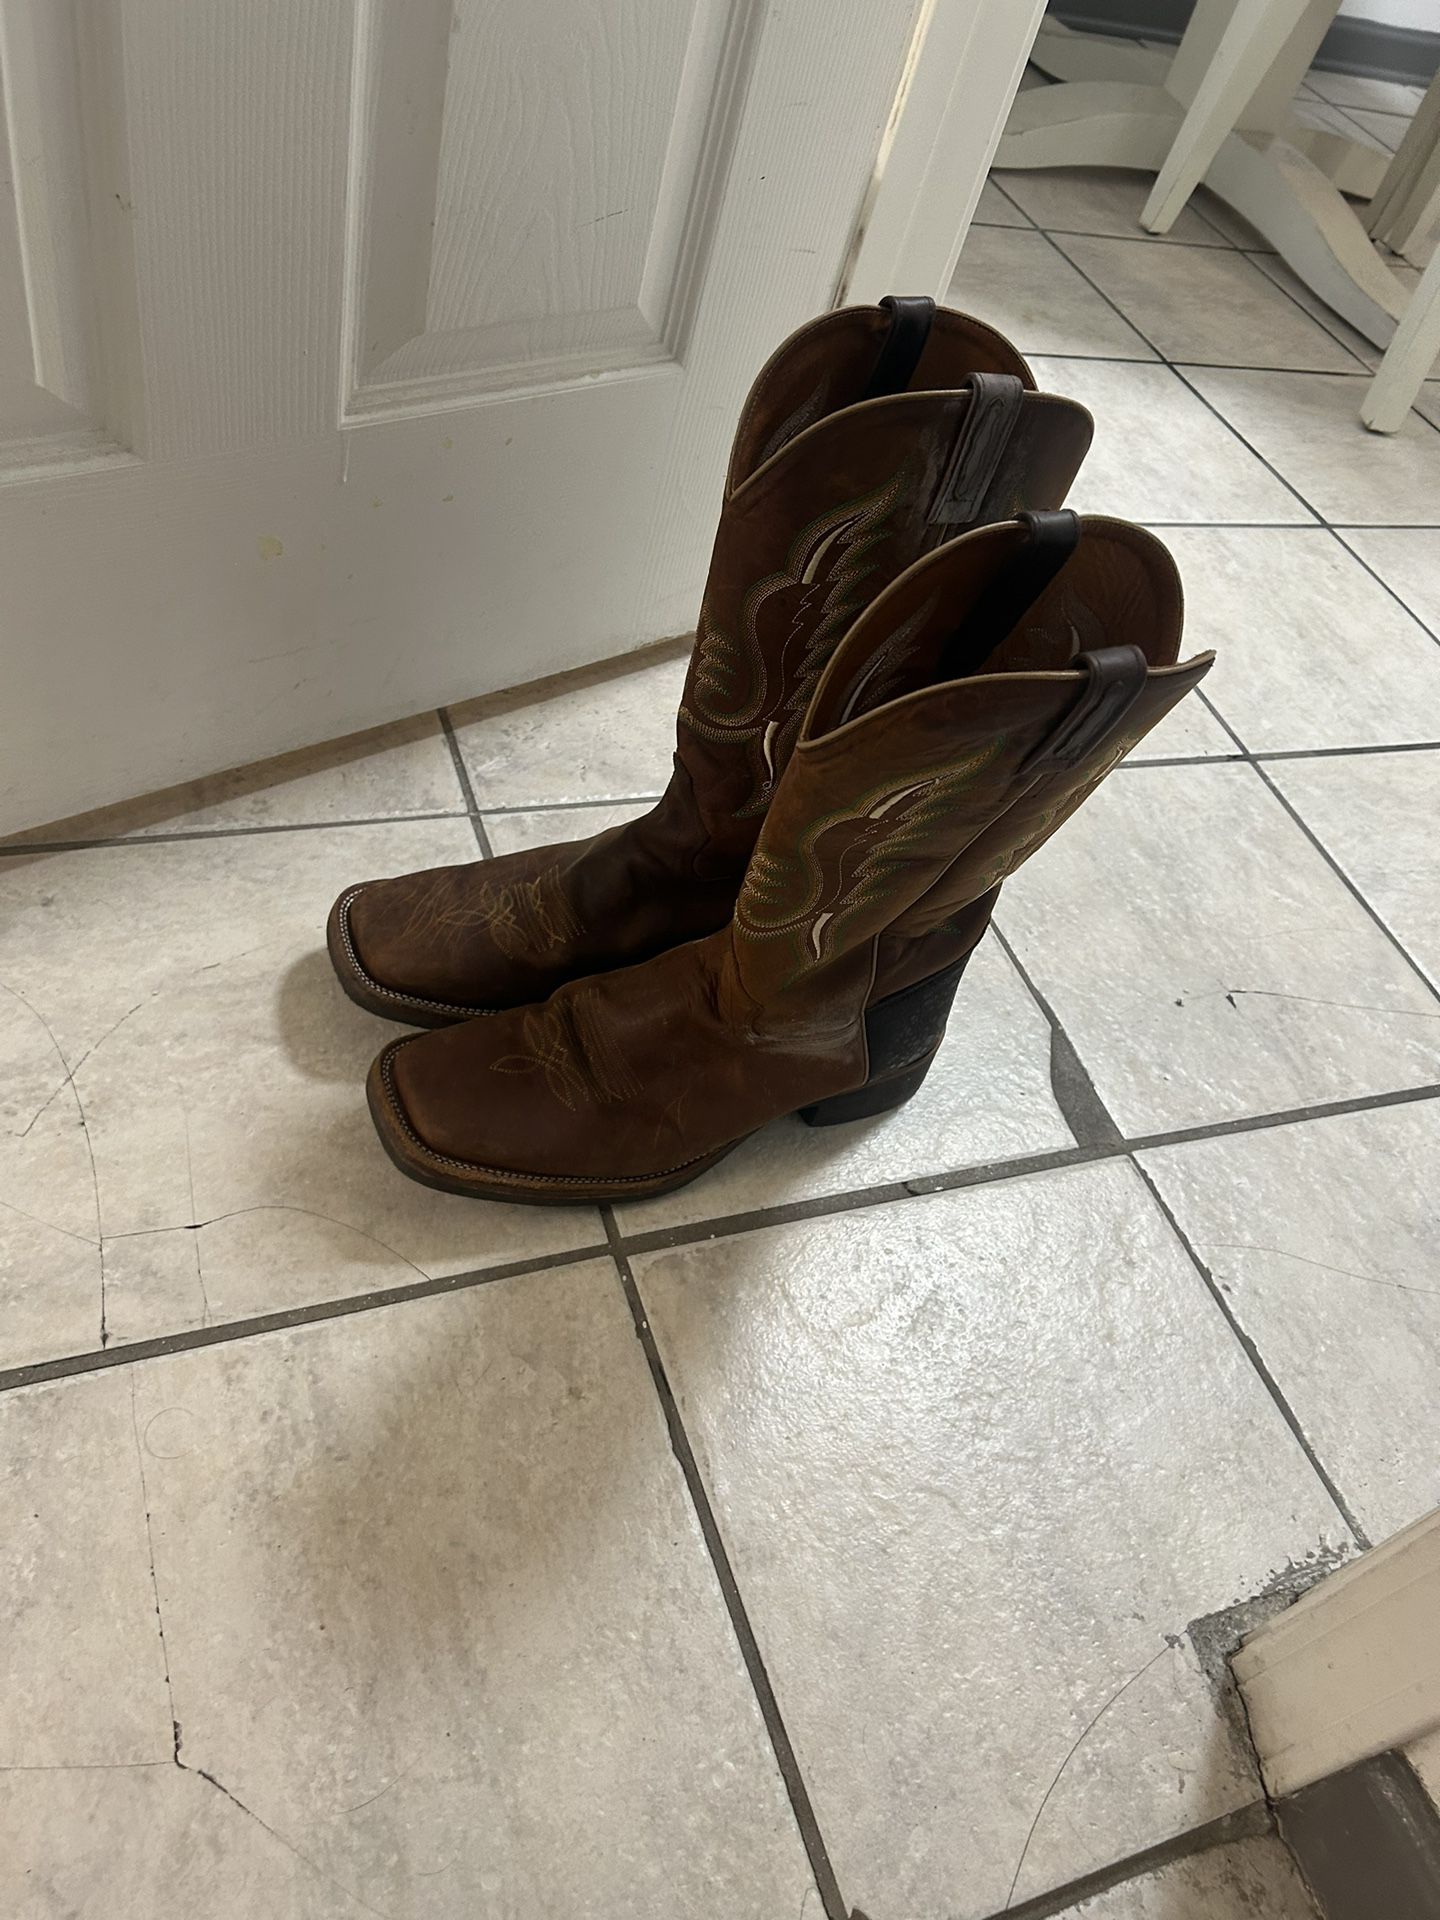 Western Boots , Squared Toe Size 11 Old West 